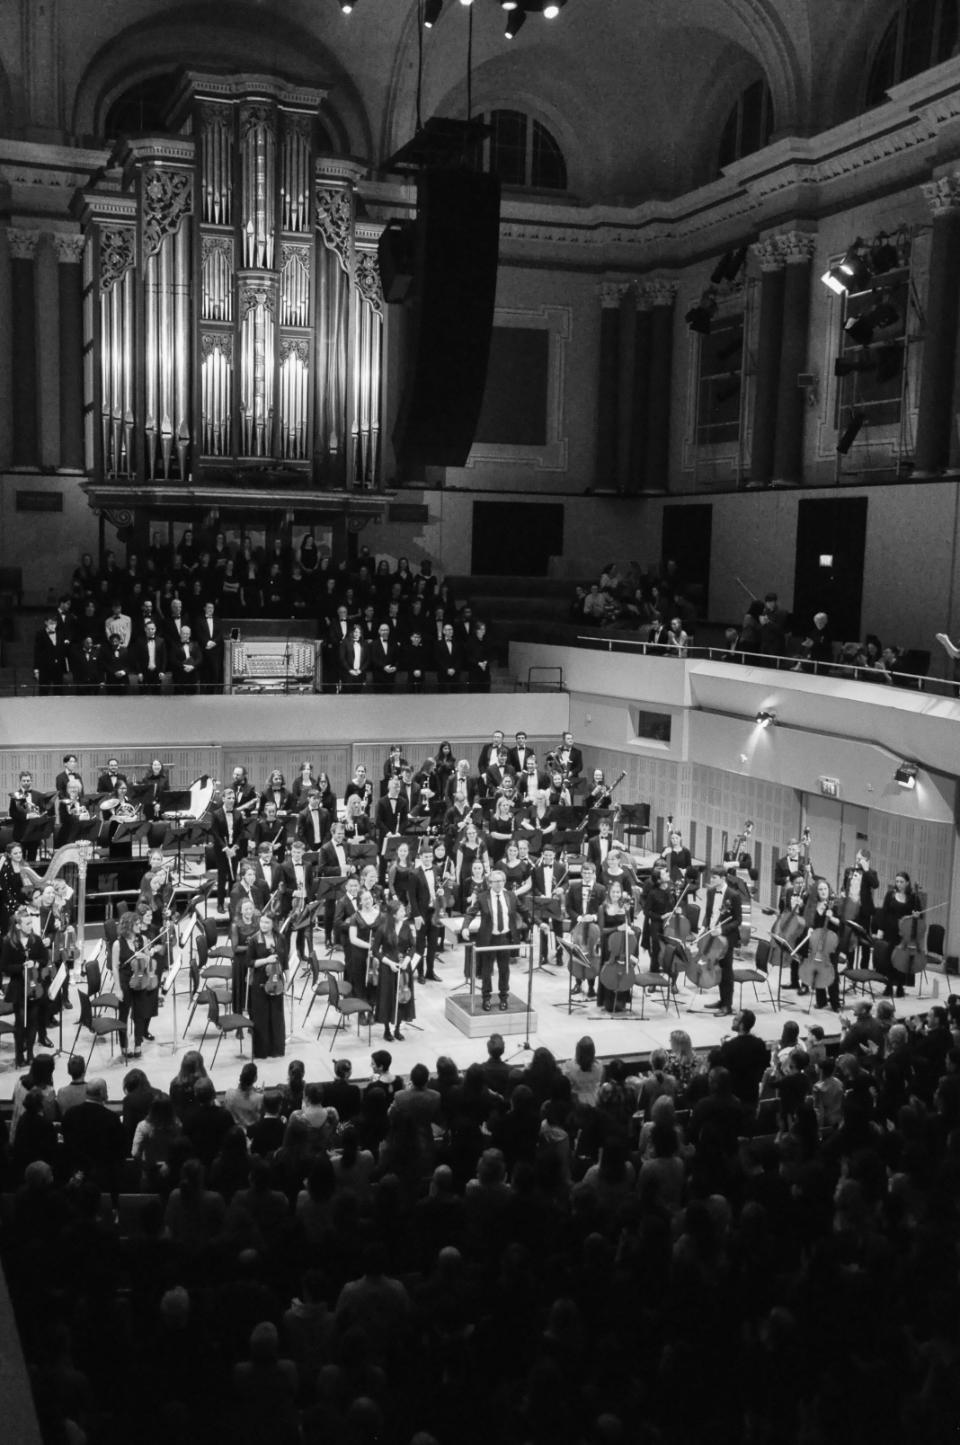 End of orchestral concert at NCH